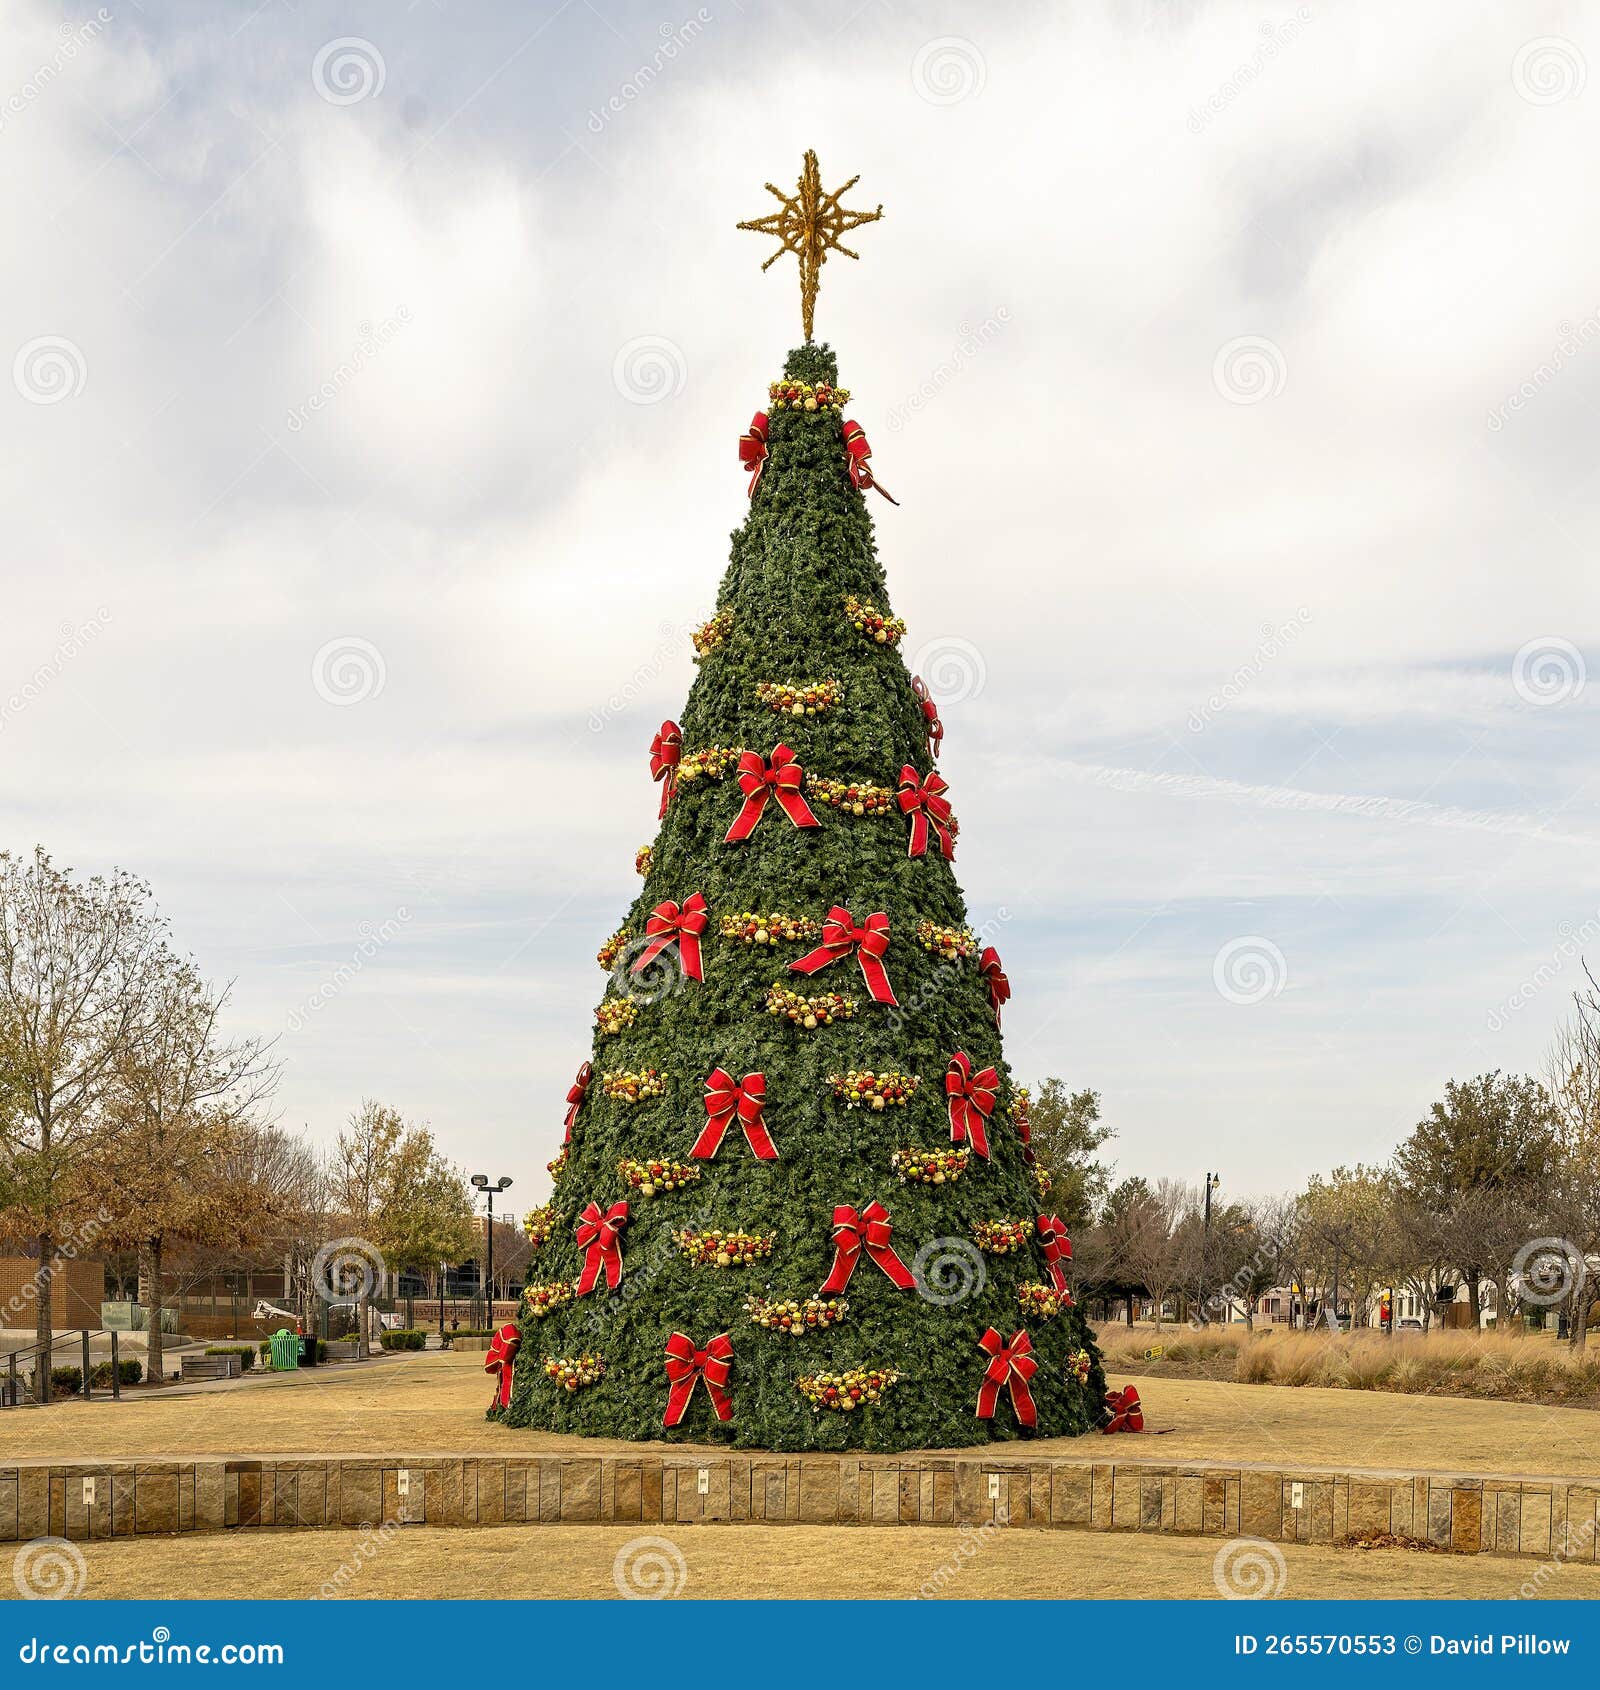 giant christmas tree in wayne ferguson plaza in the city of lewisville, texas.